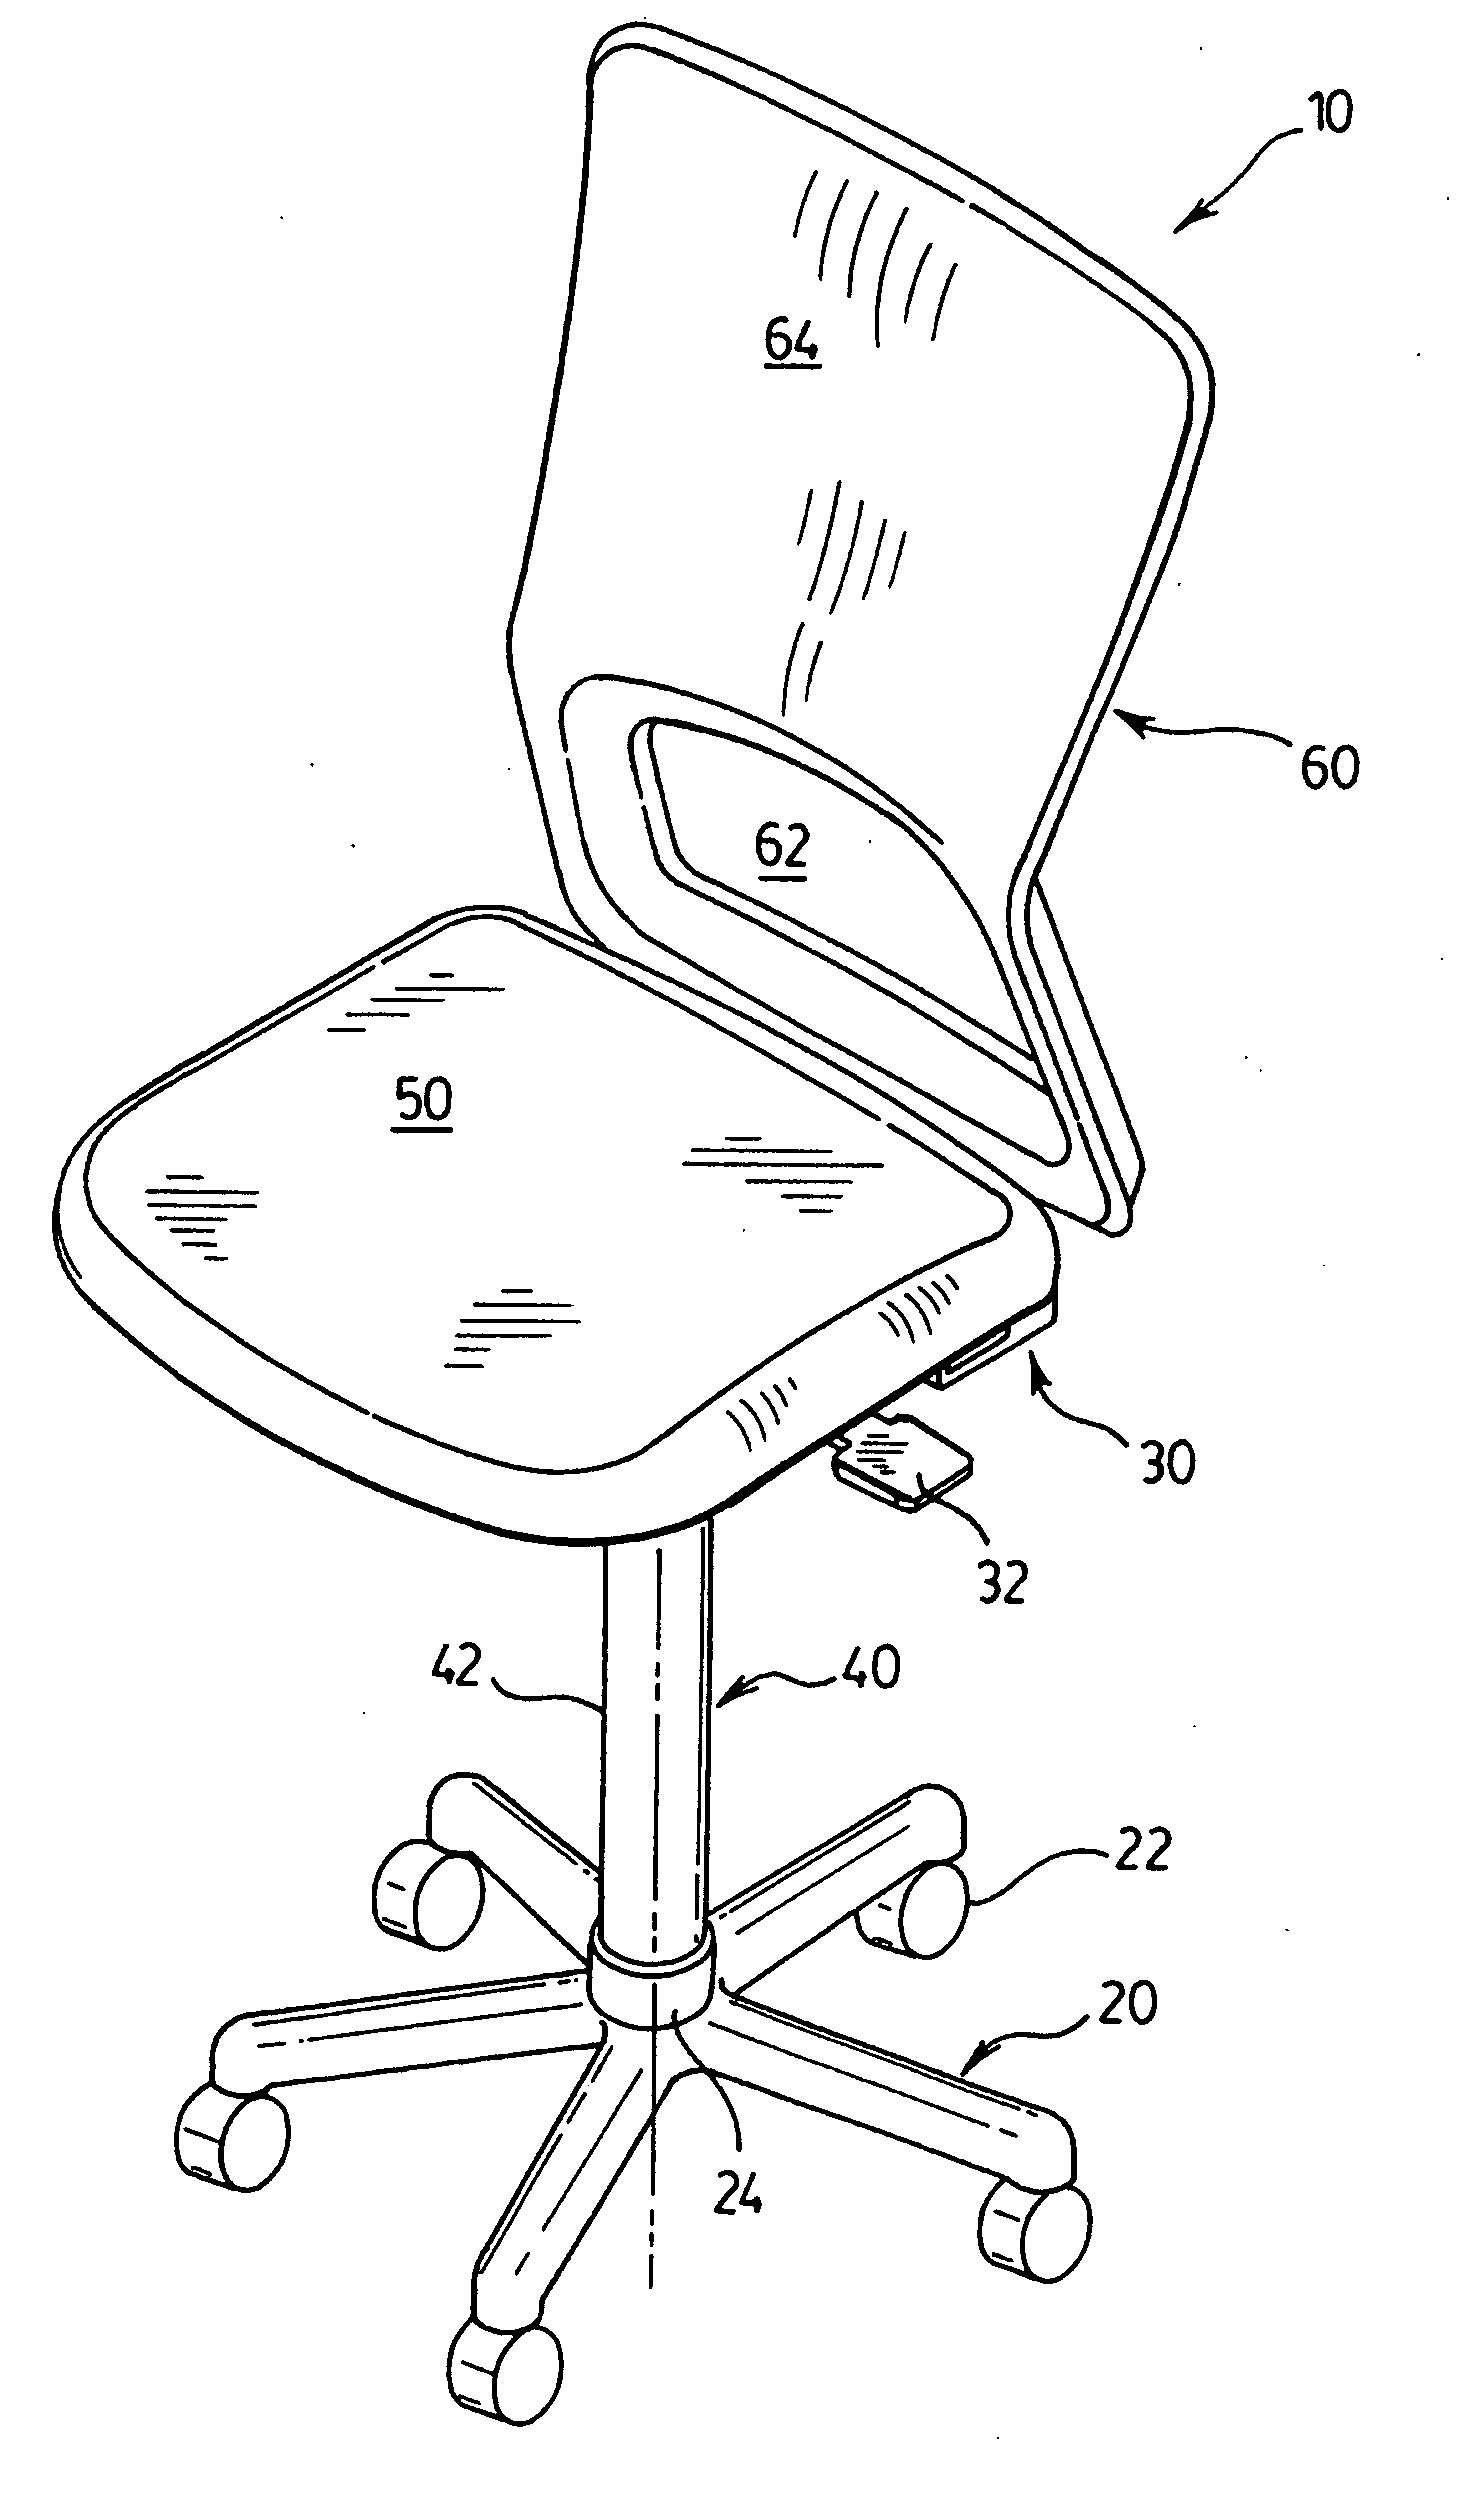 Tiltable chair accommodating male and female user seating position preferences